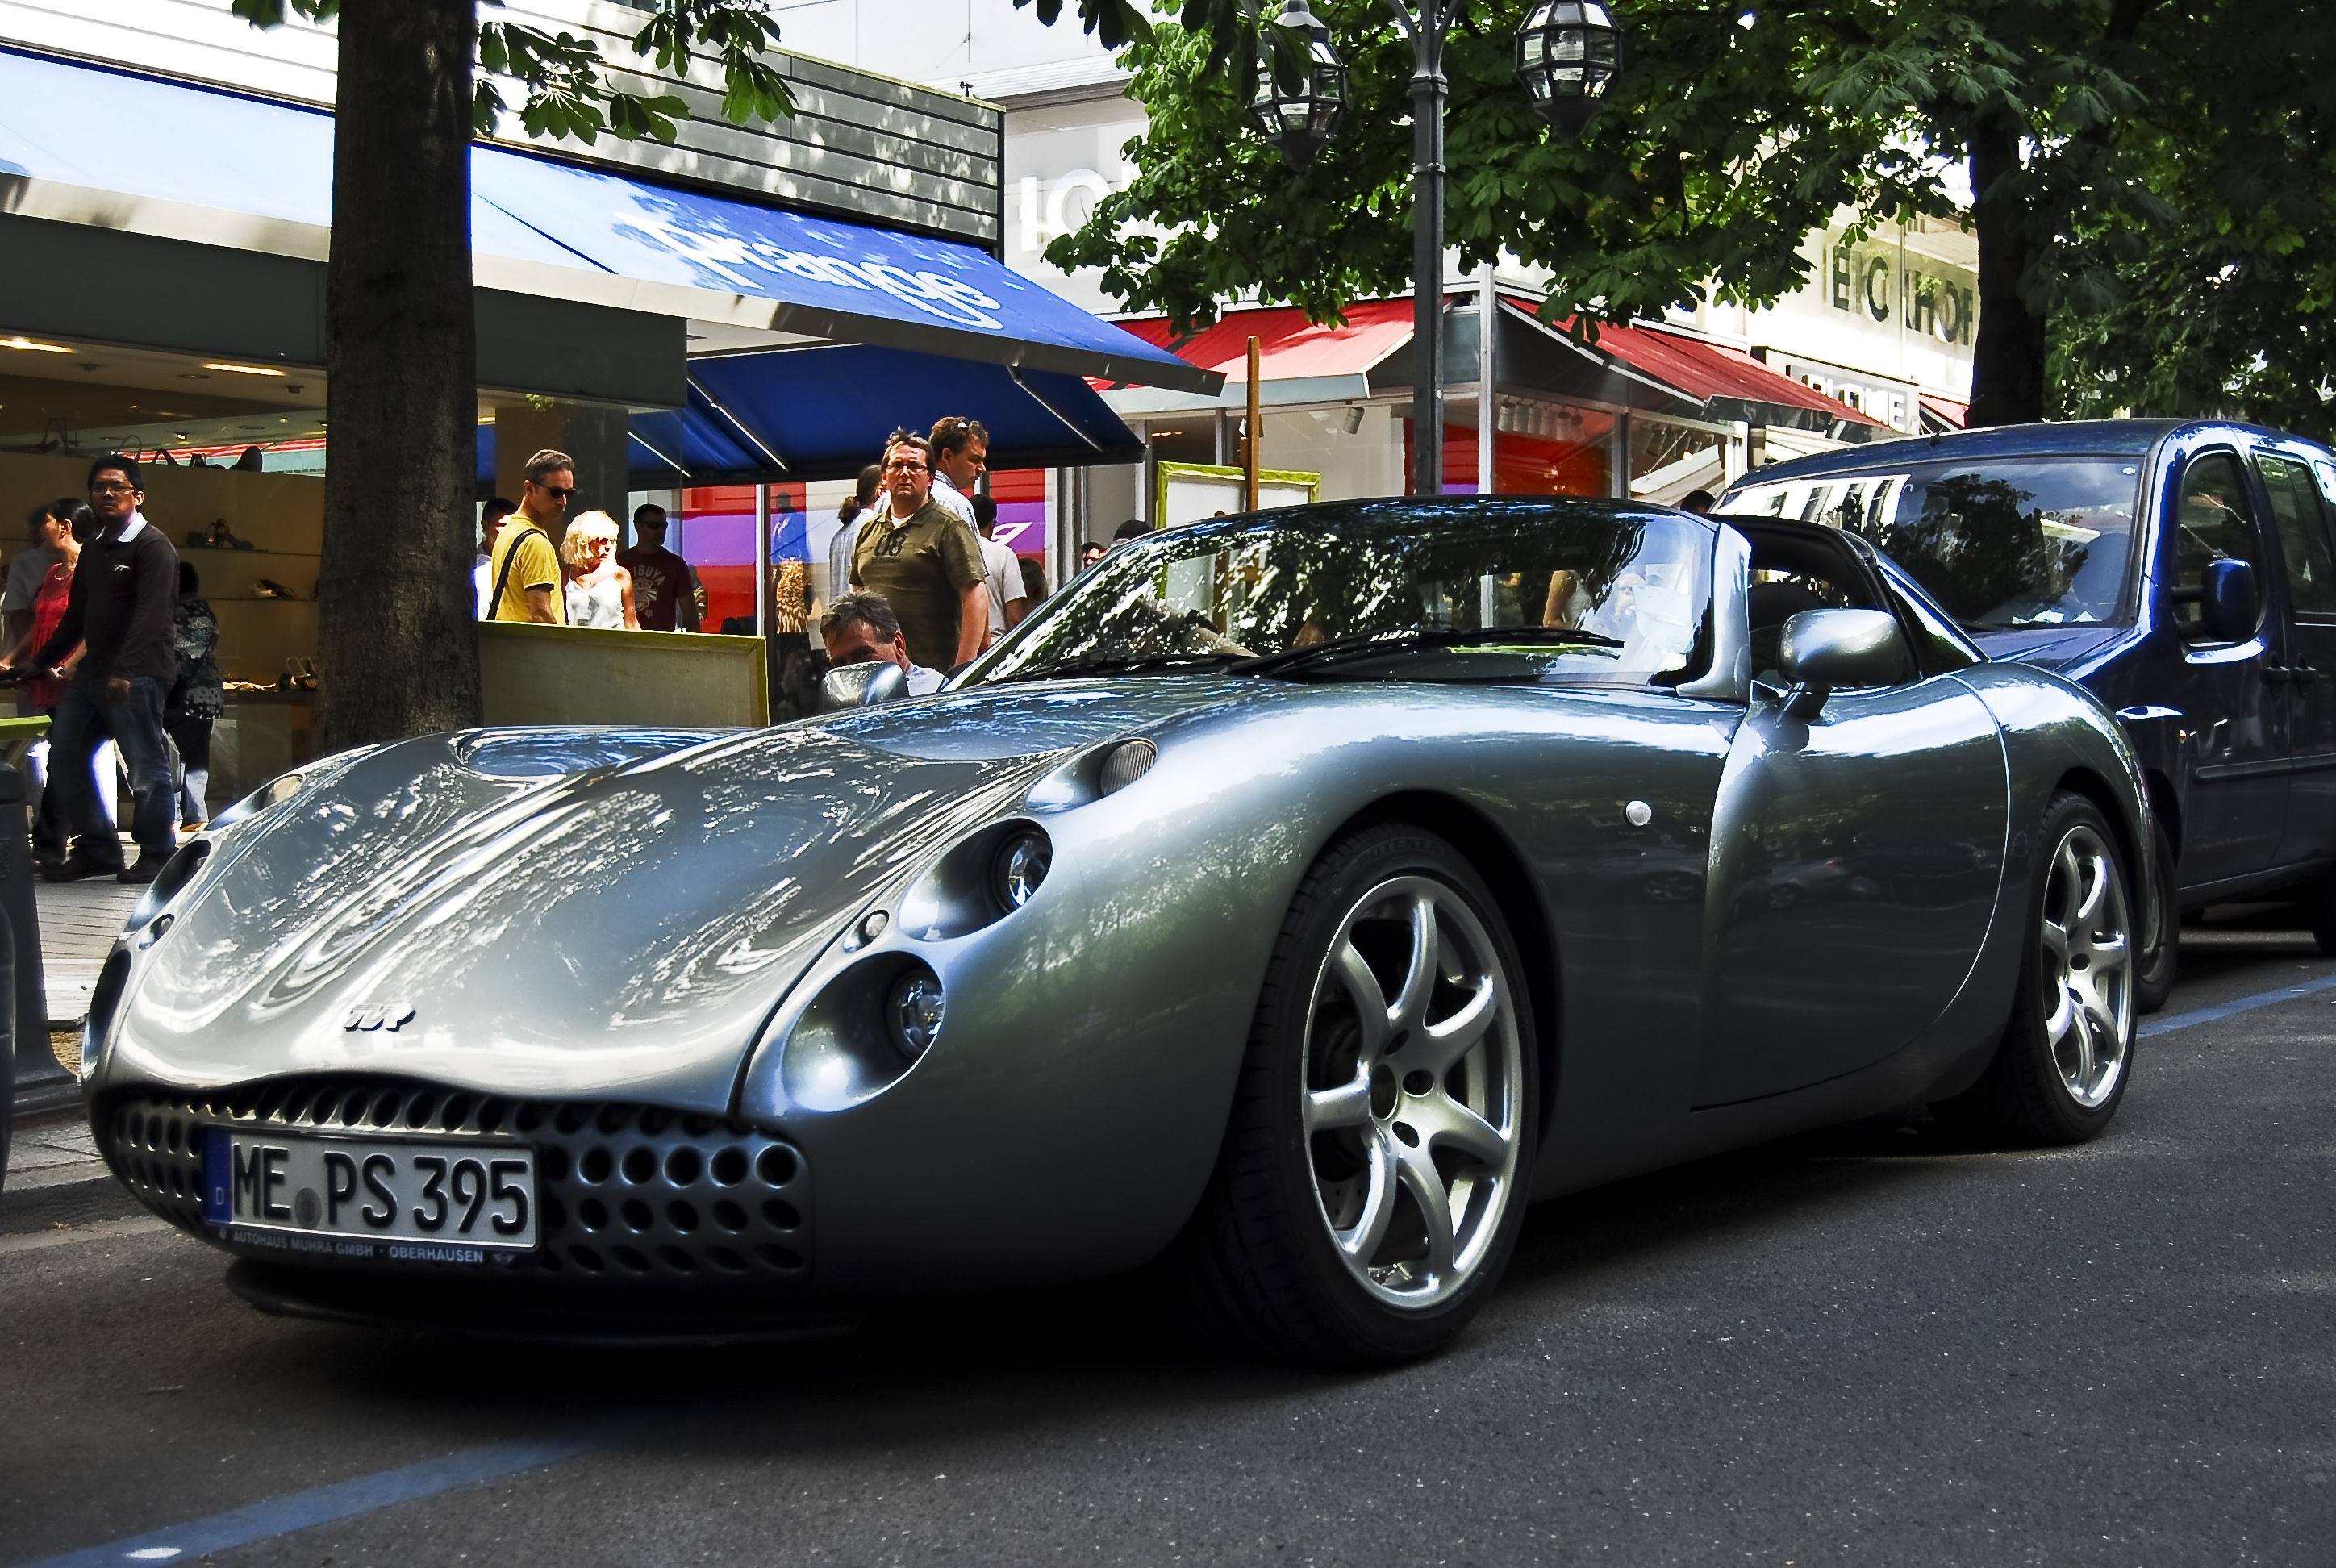 Dreamcar:TVR Tuscan by